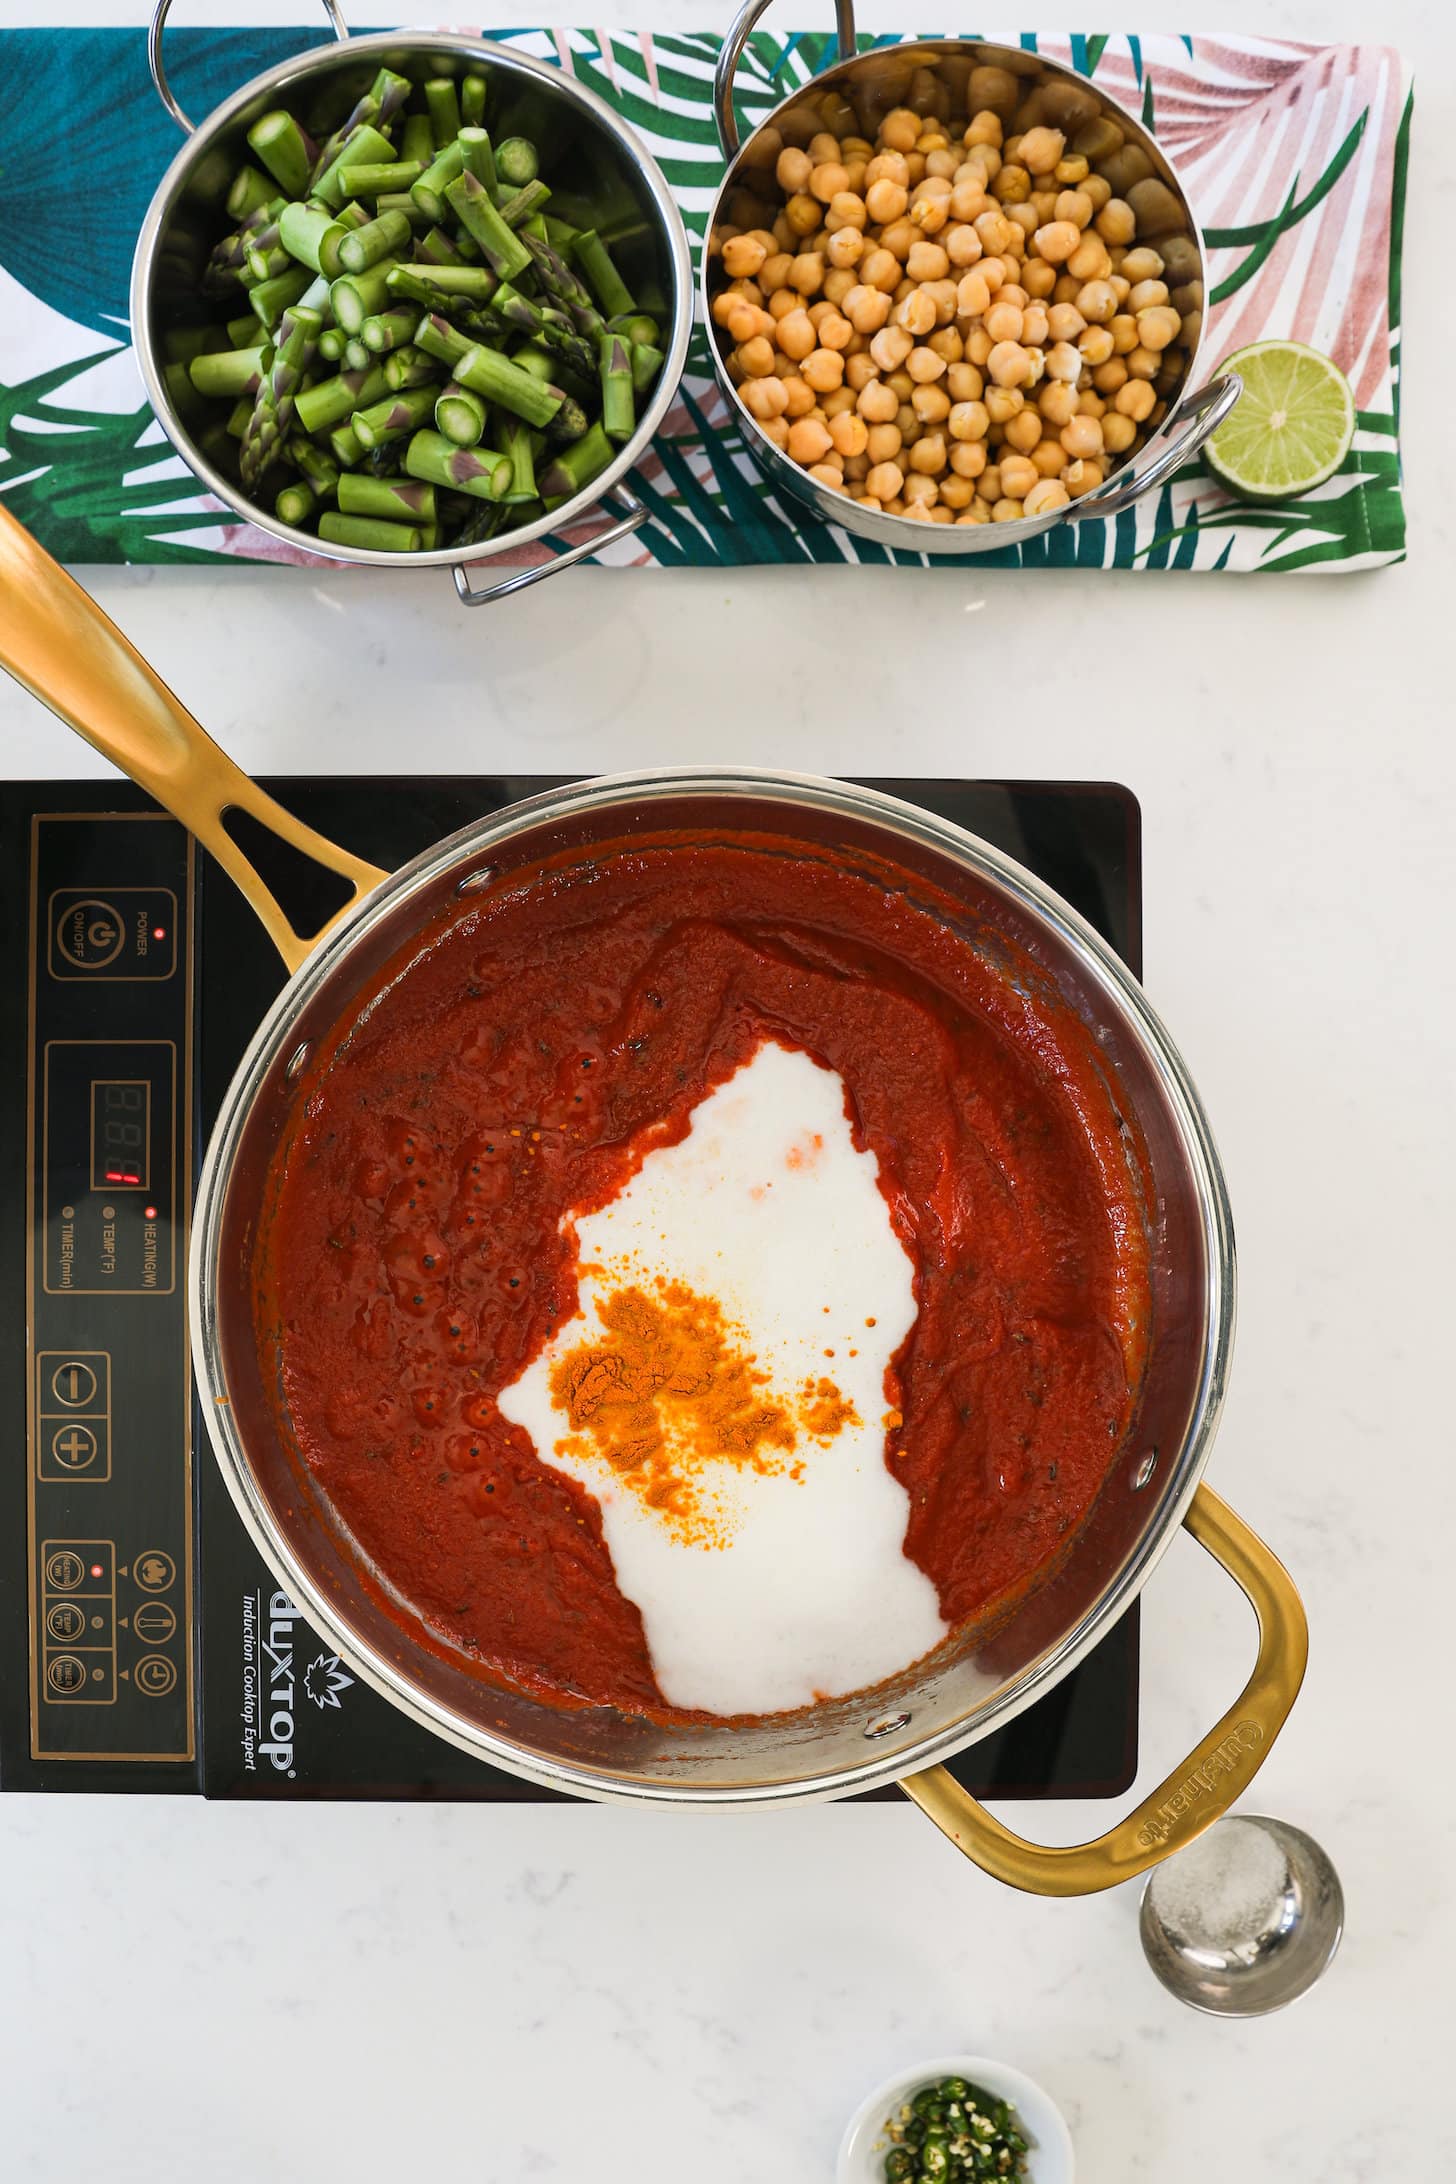 a pan of tomato sauce with a splash of white sauce and an orange powder on top.